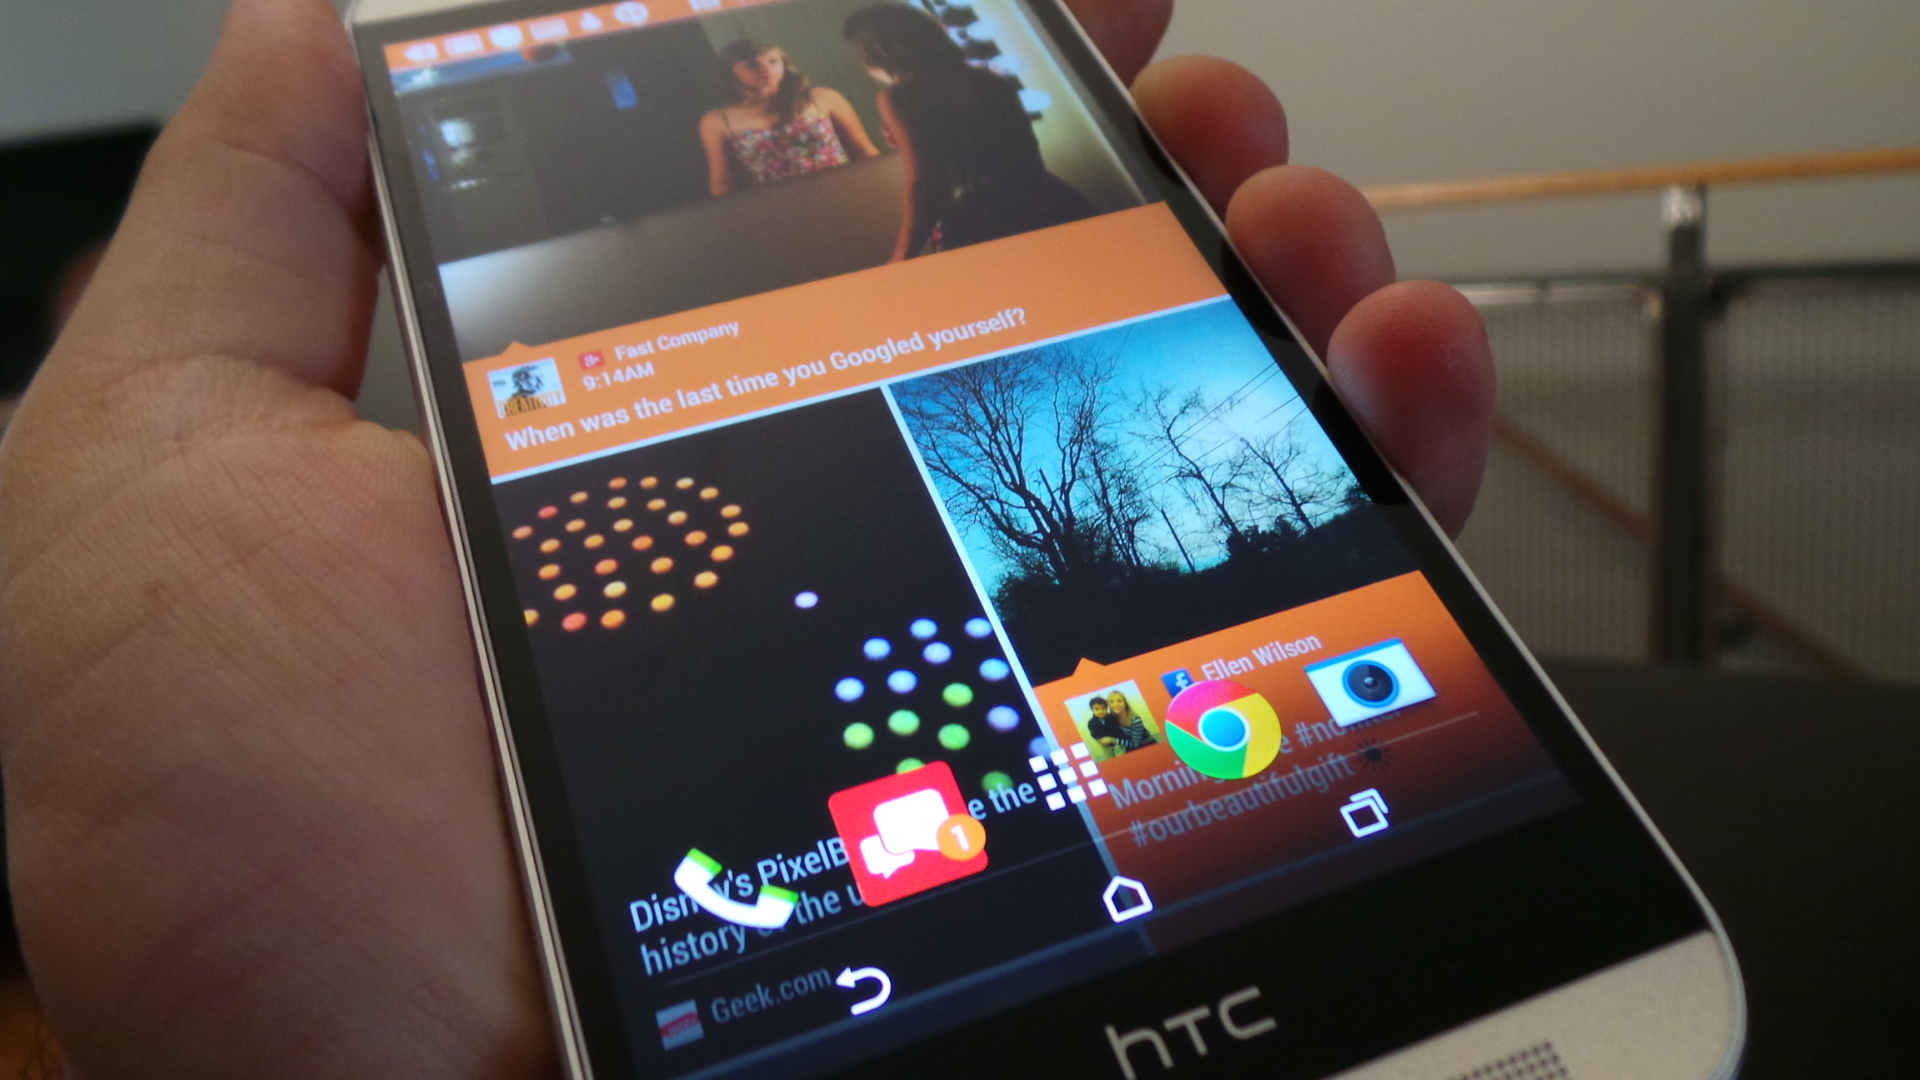 how to download htc one m8 drivers